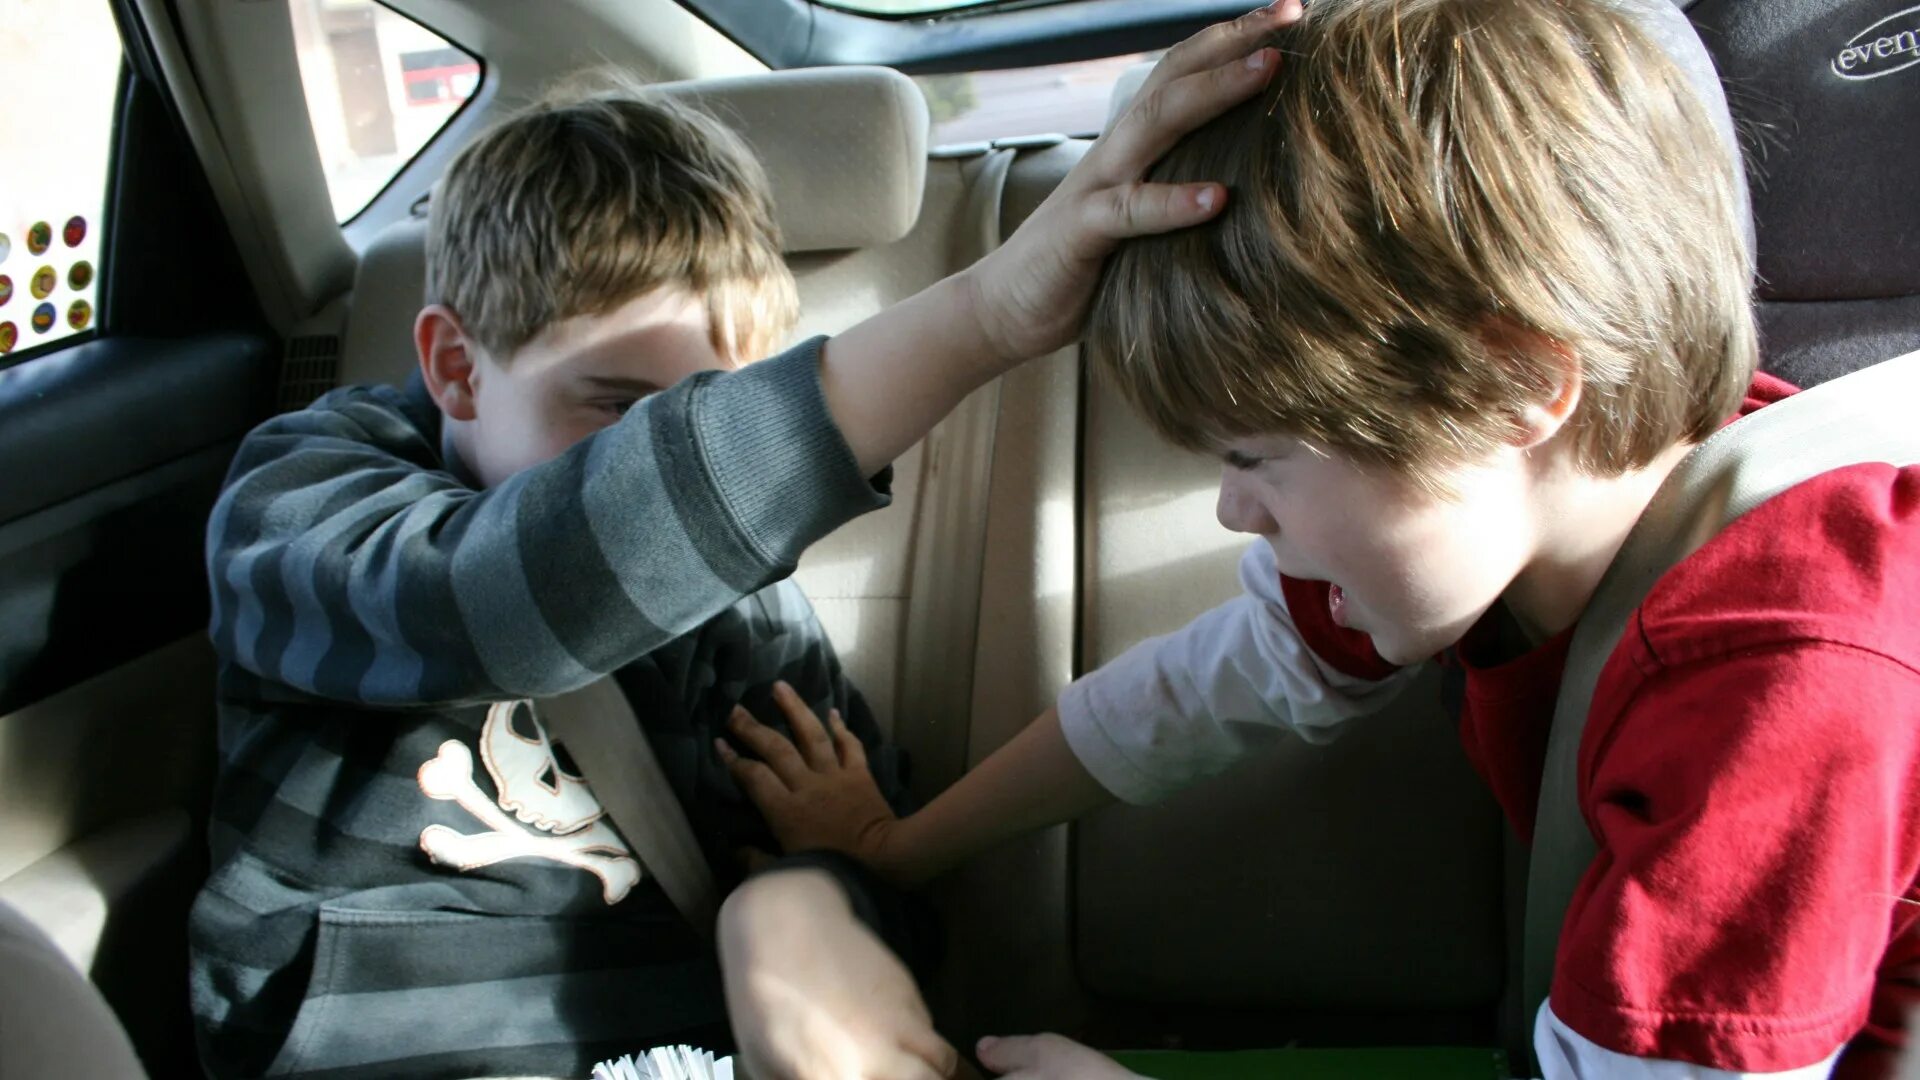 Little boy dick. Children in the back Seat of the car. Ребенок erect. Freewebs мальчик.